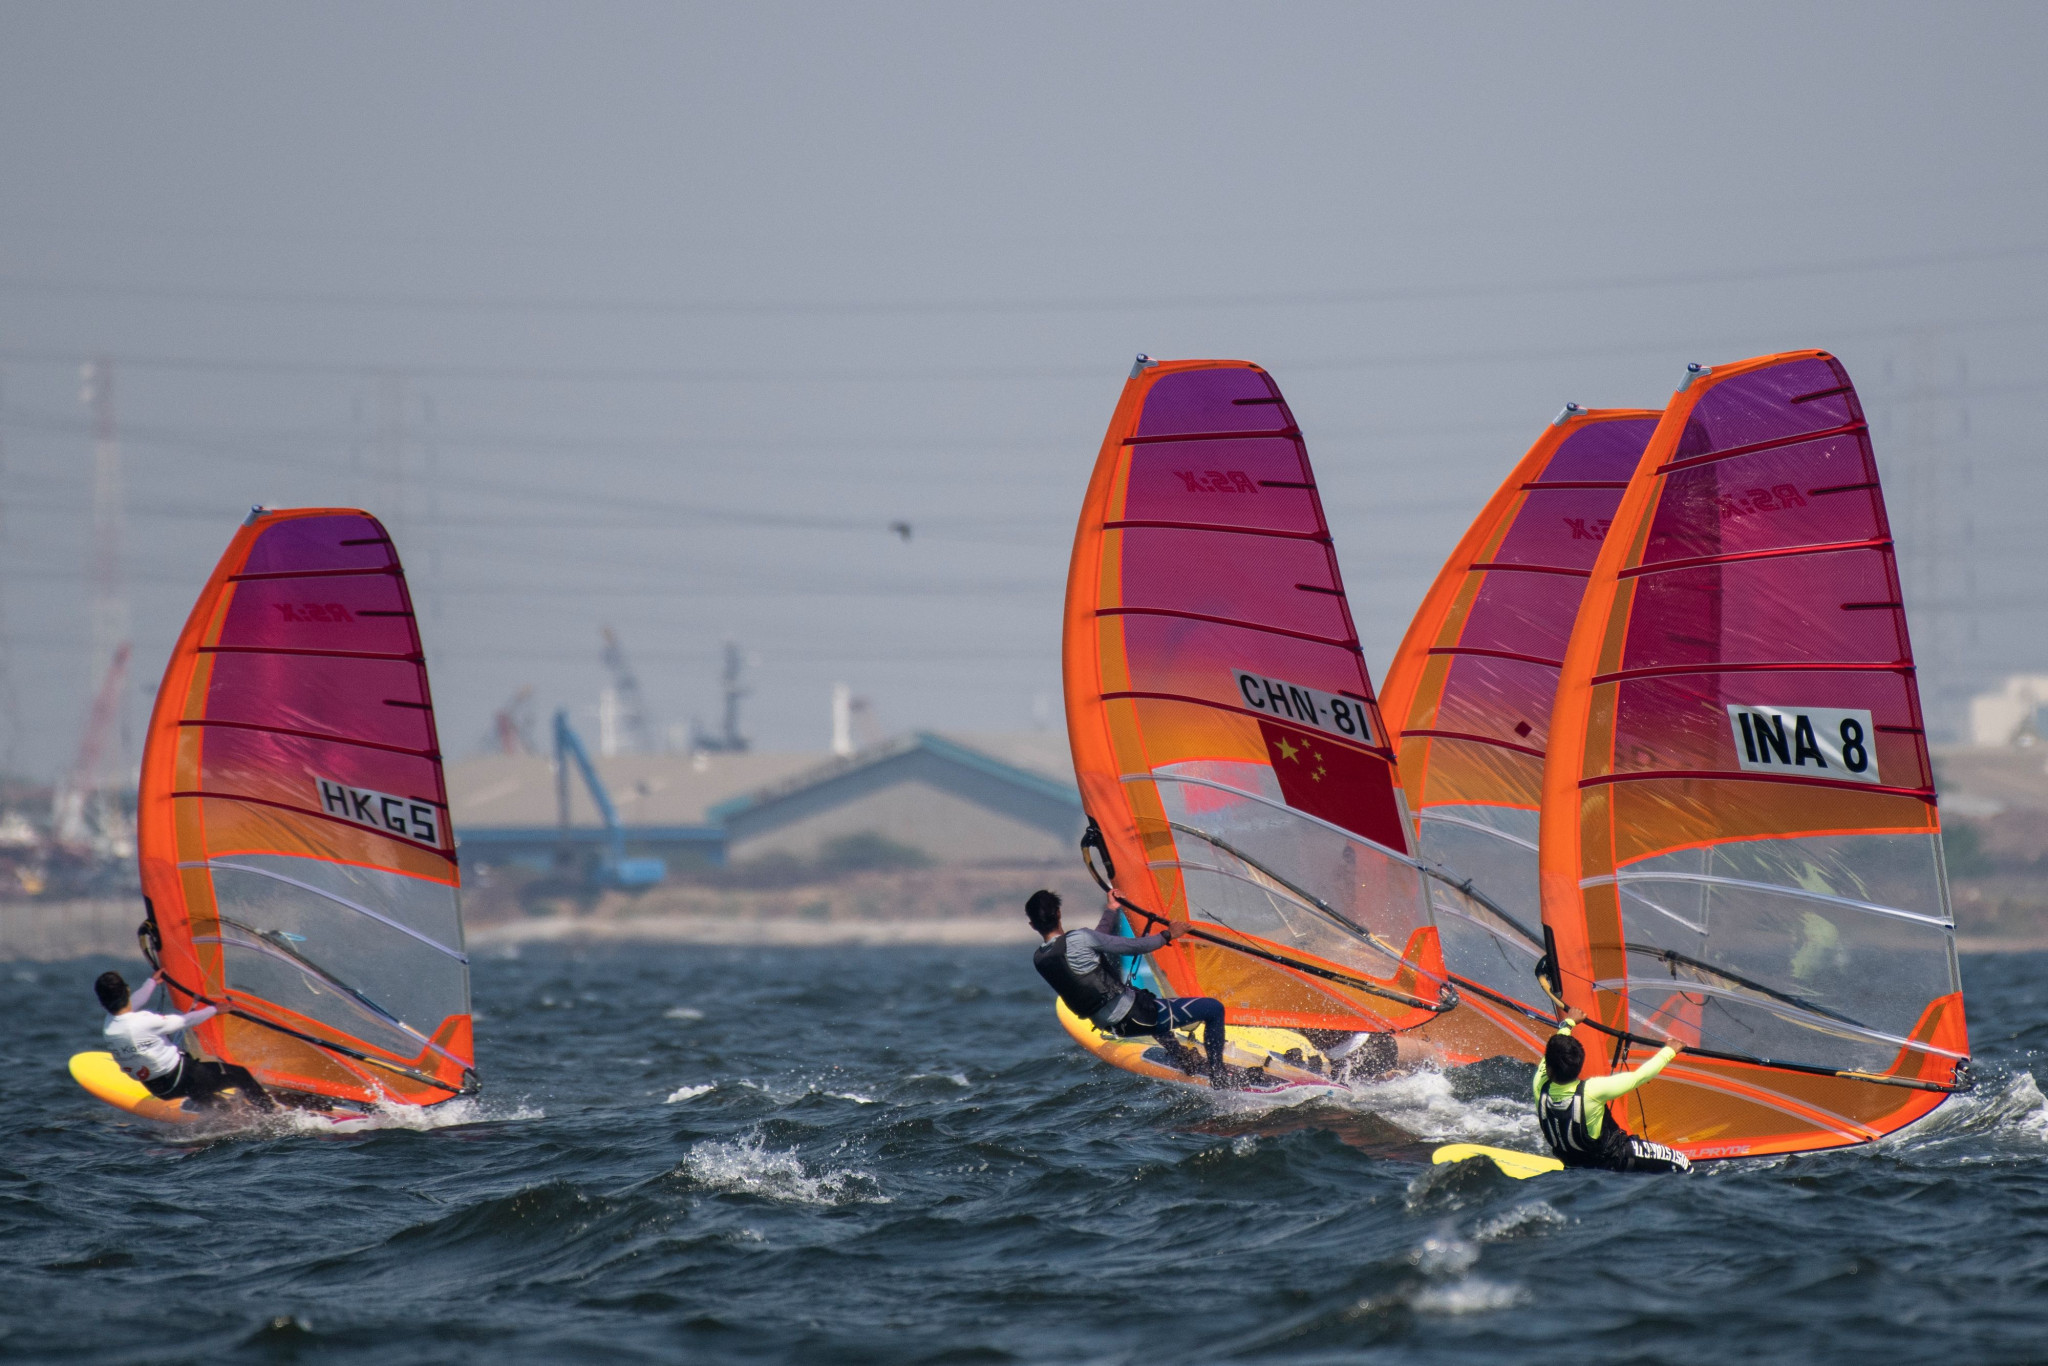 The RS:X could be replaced as the windsurfing equipment for Paris 2024 ©Getty Images